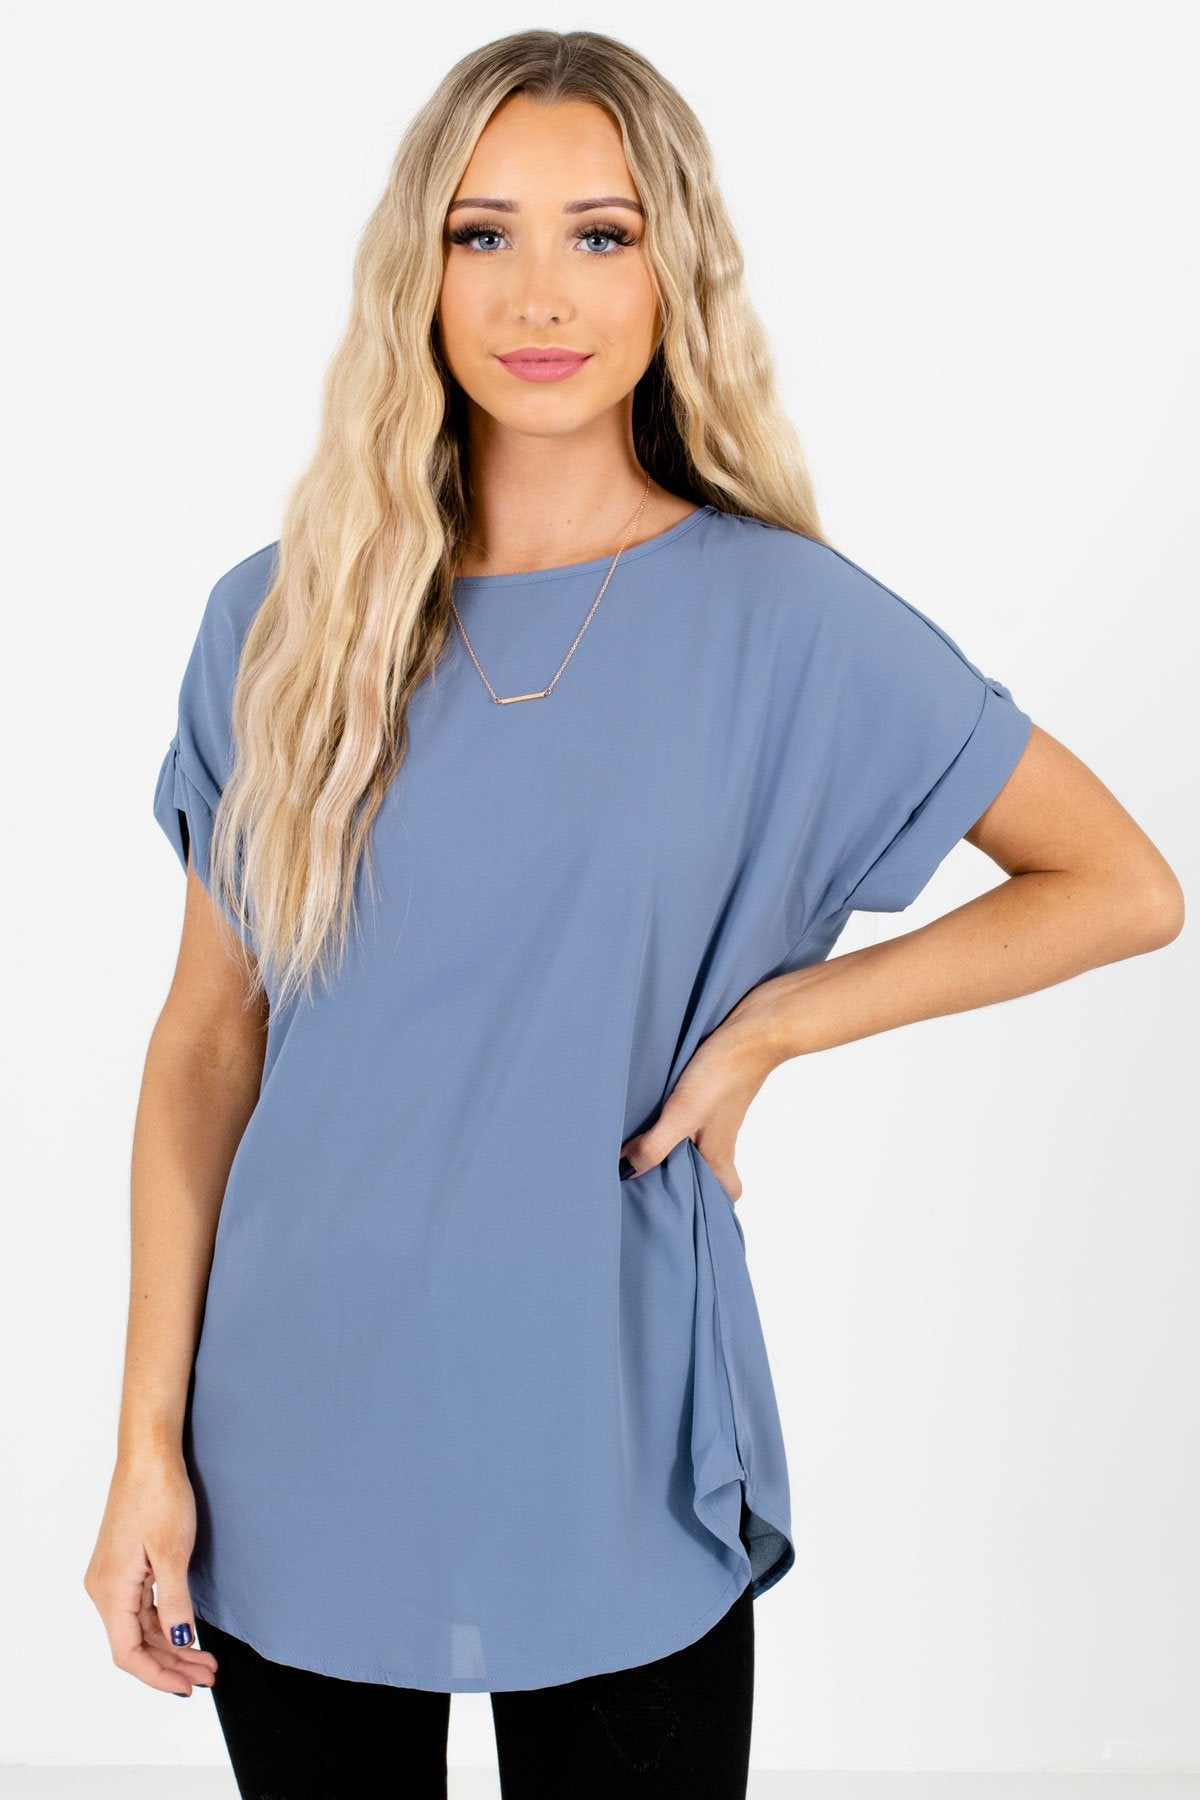 Blue Lightweight and Flowy Boutique Blouses for Women